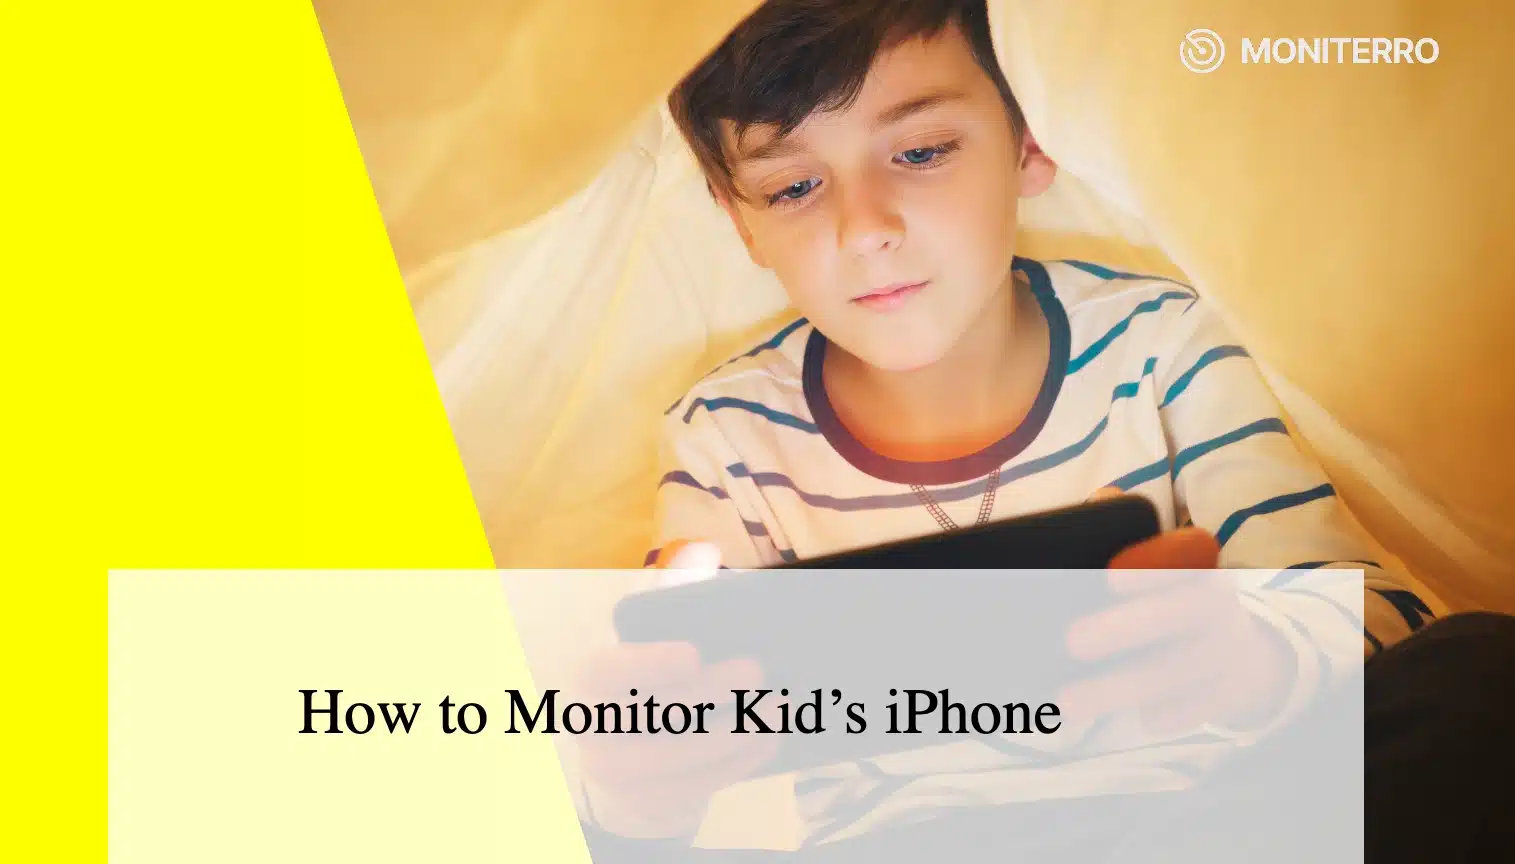 How to Monitor Kid’s iPhone